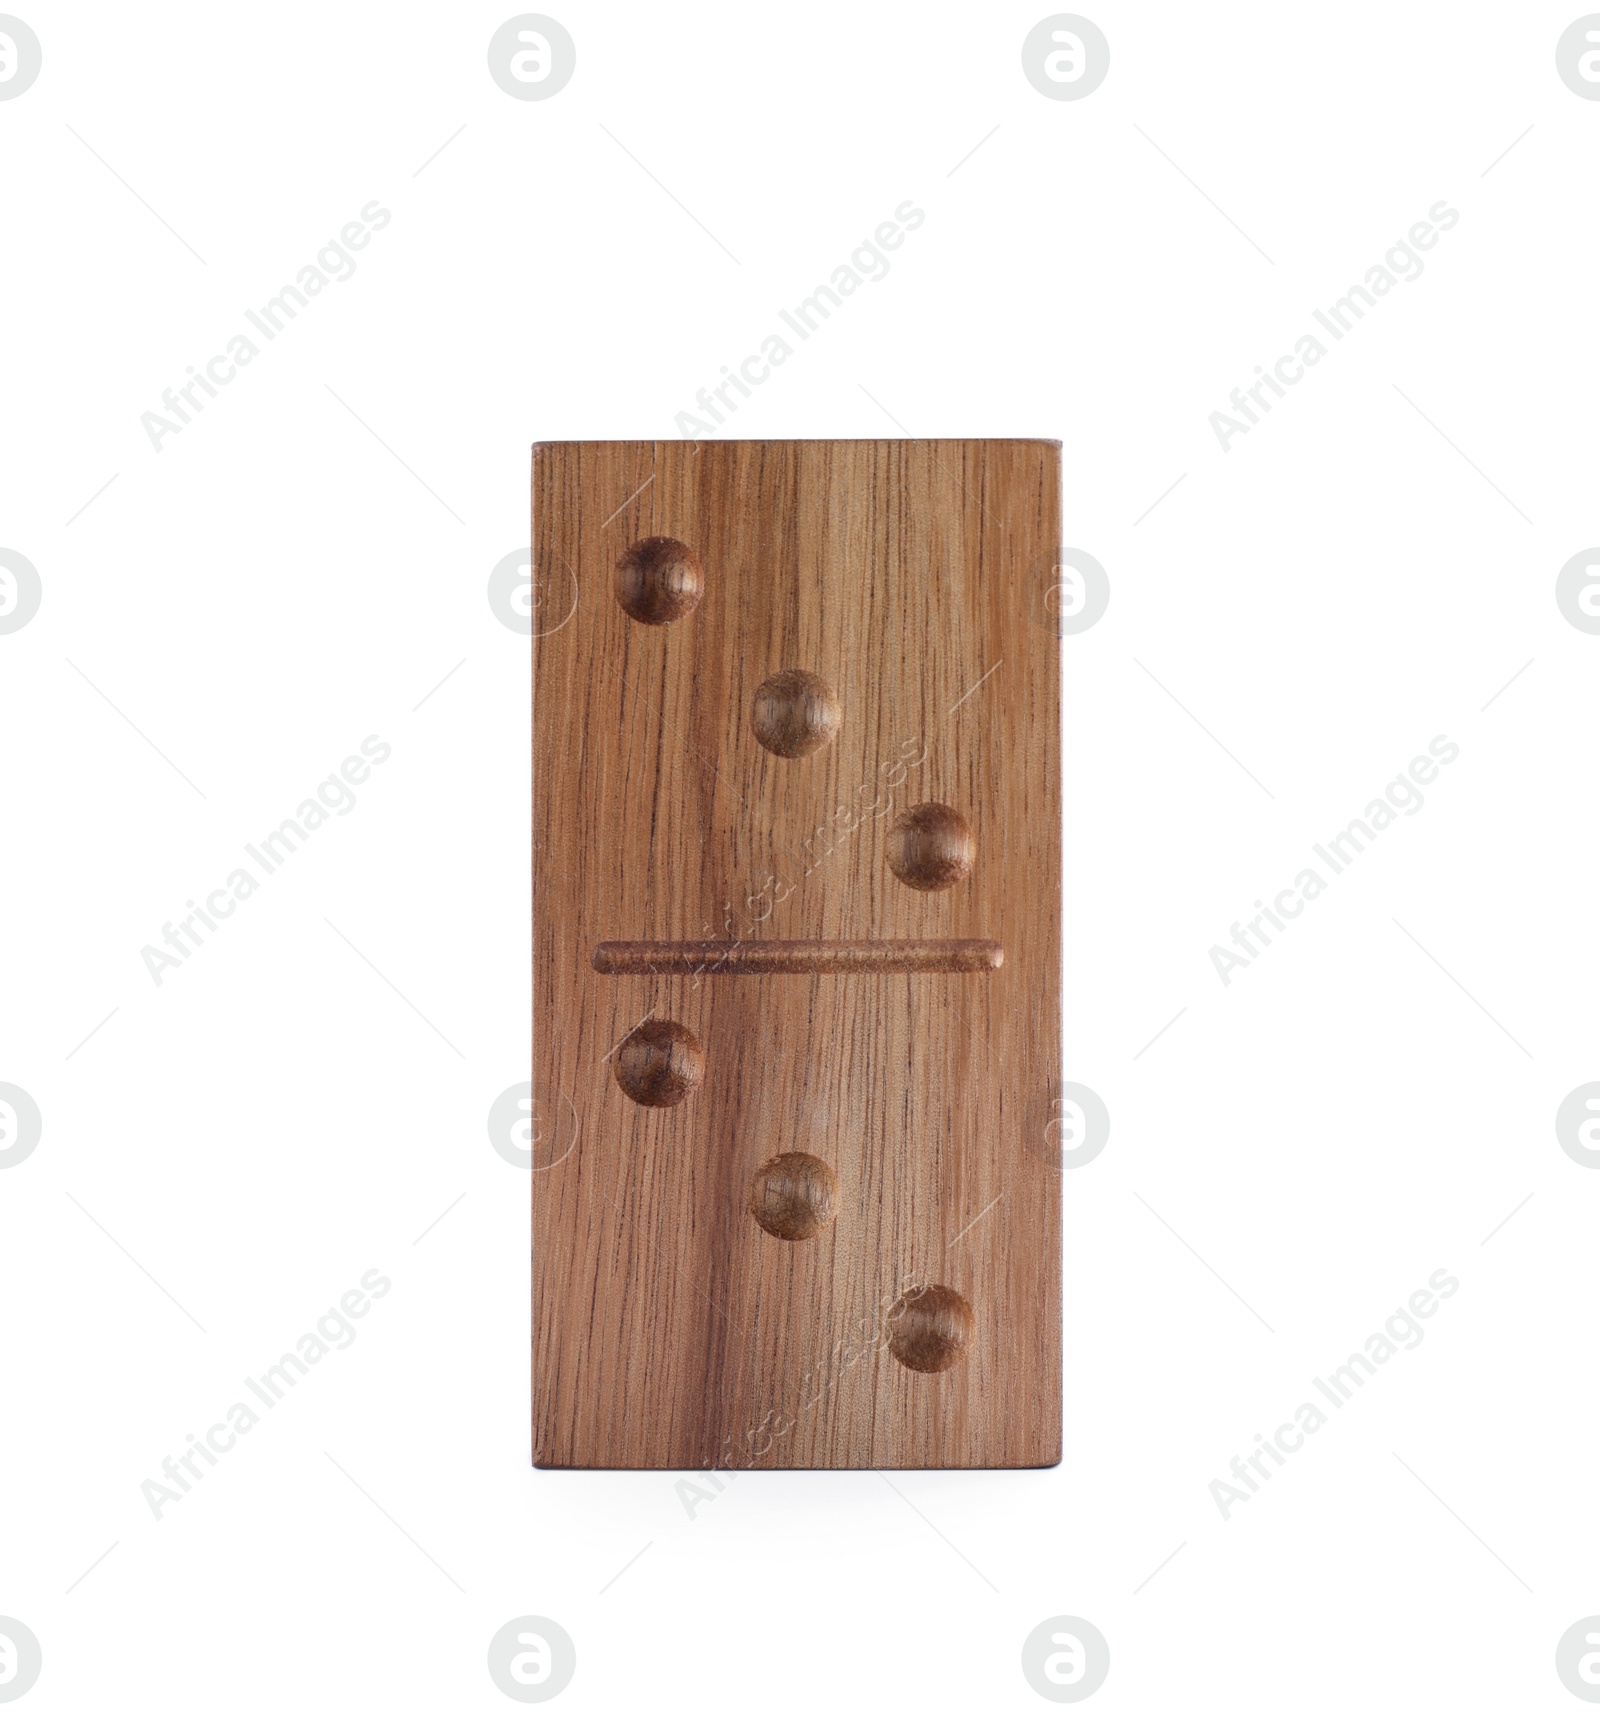 Photo of Wooden domino tile with pips isolated on white